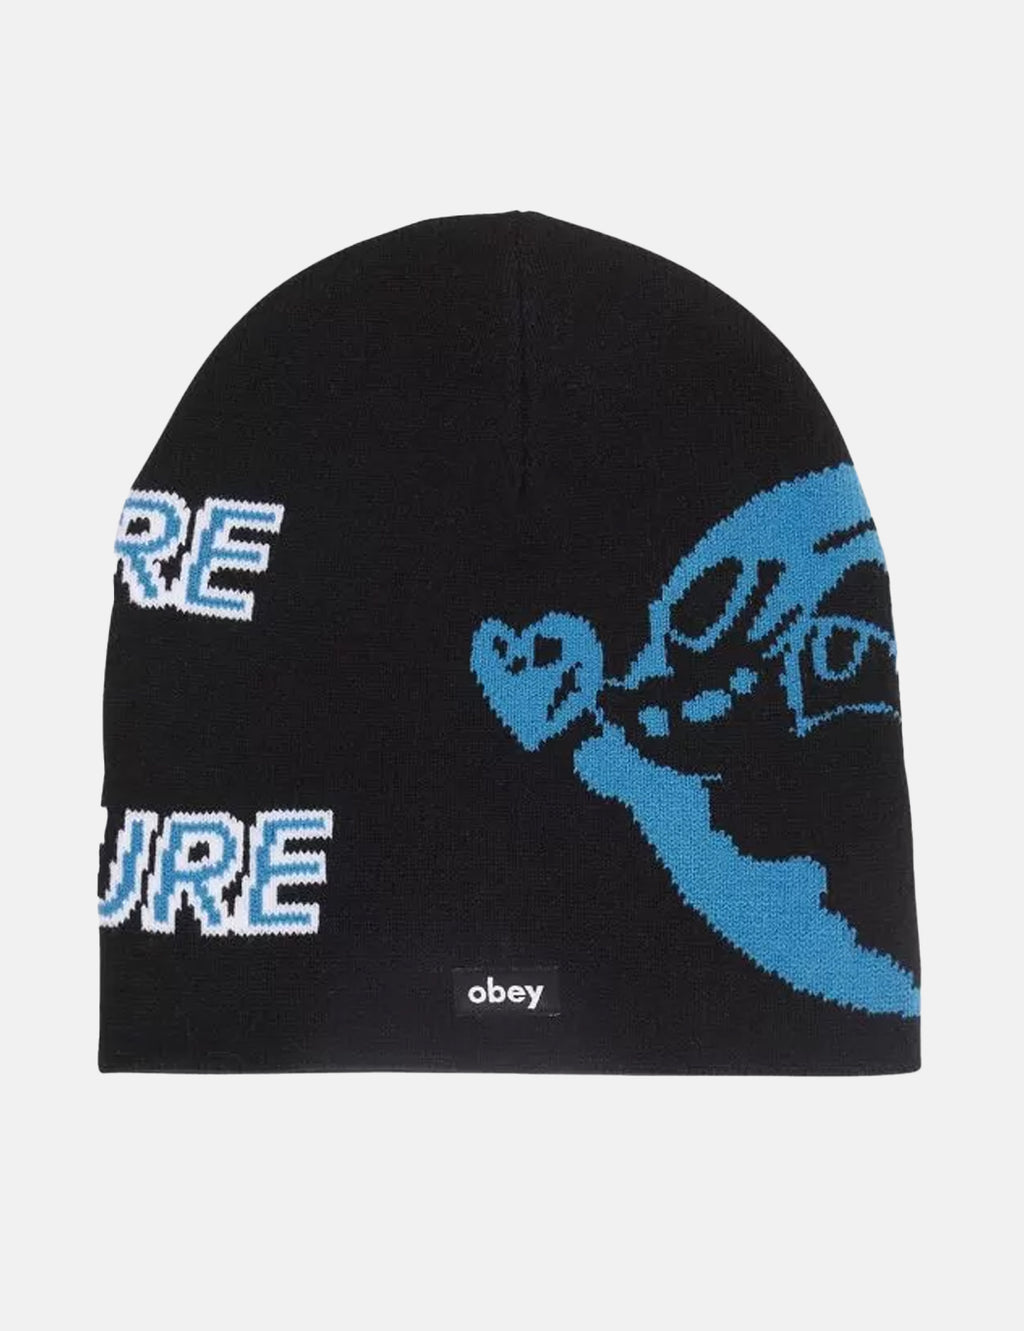 Obey Nature Beanie URBAN Urban Excess. I And – Nuture Black - Hat EXCESS